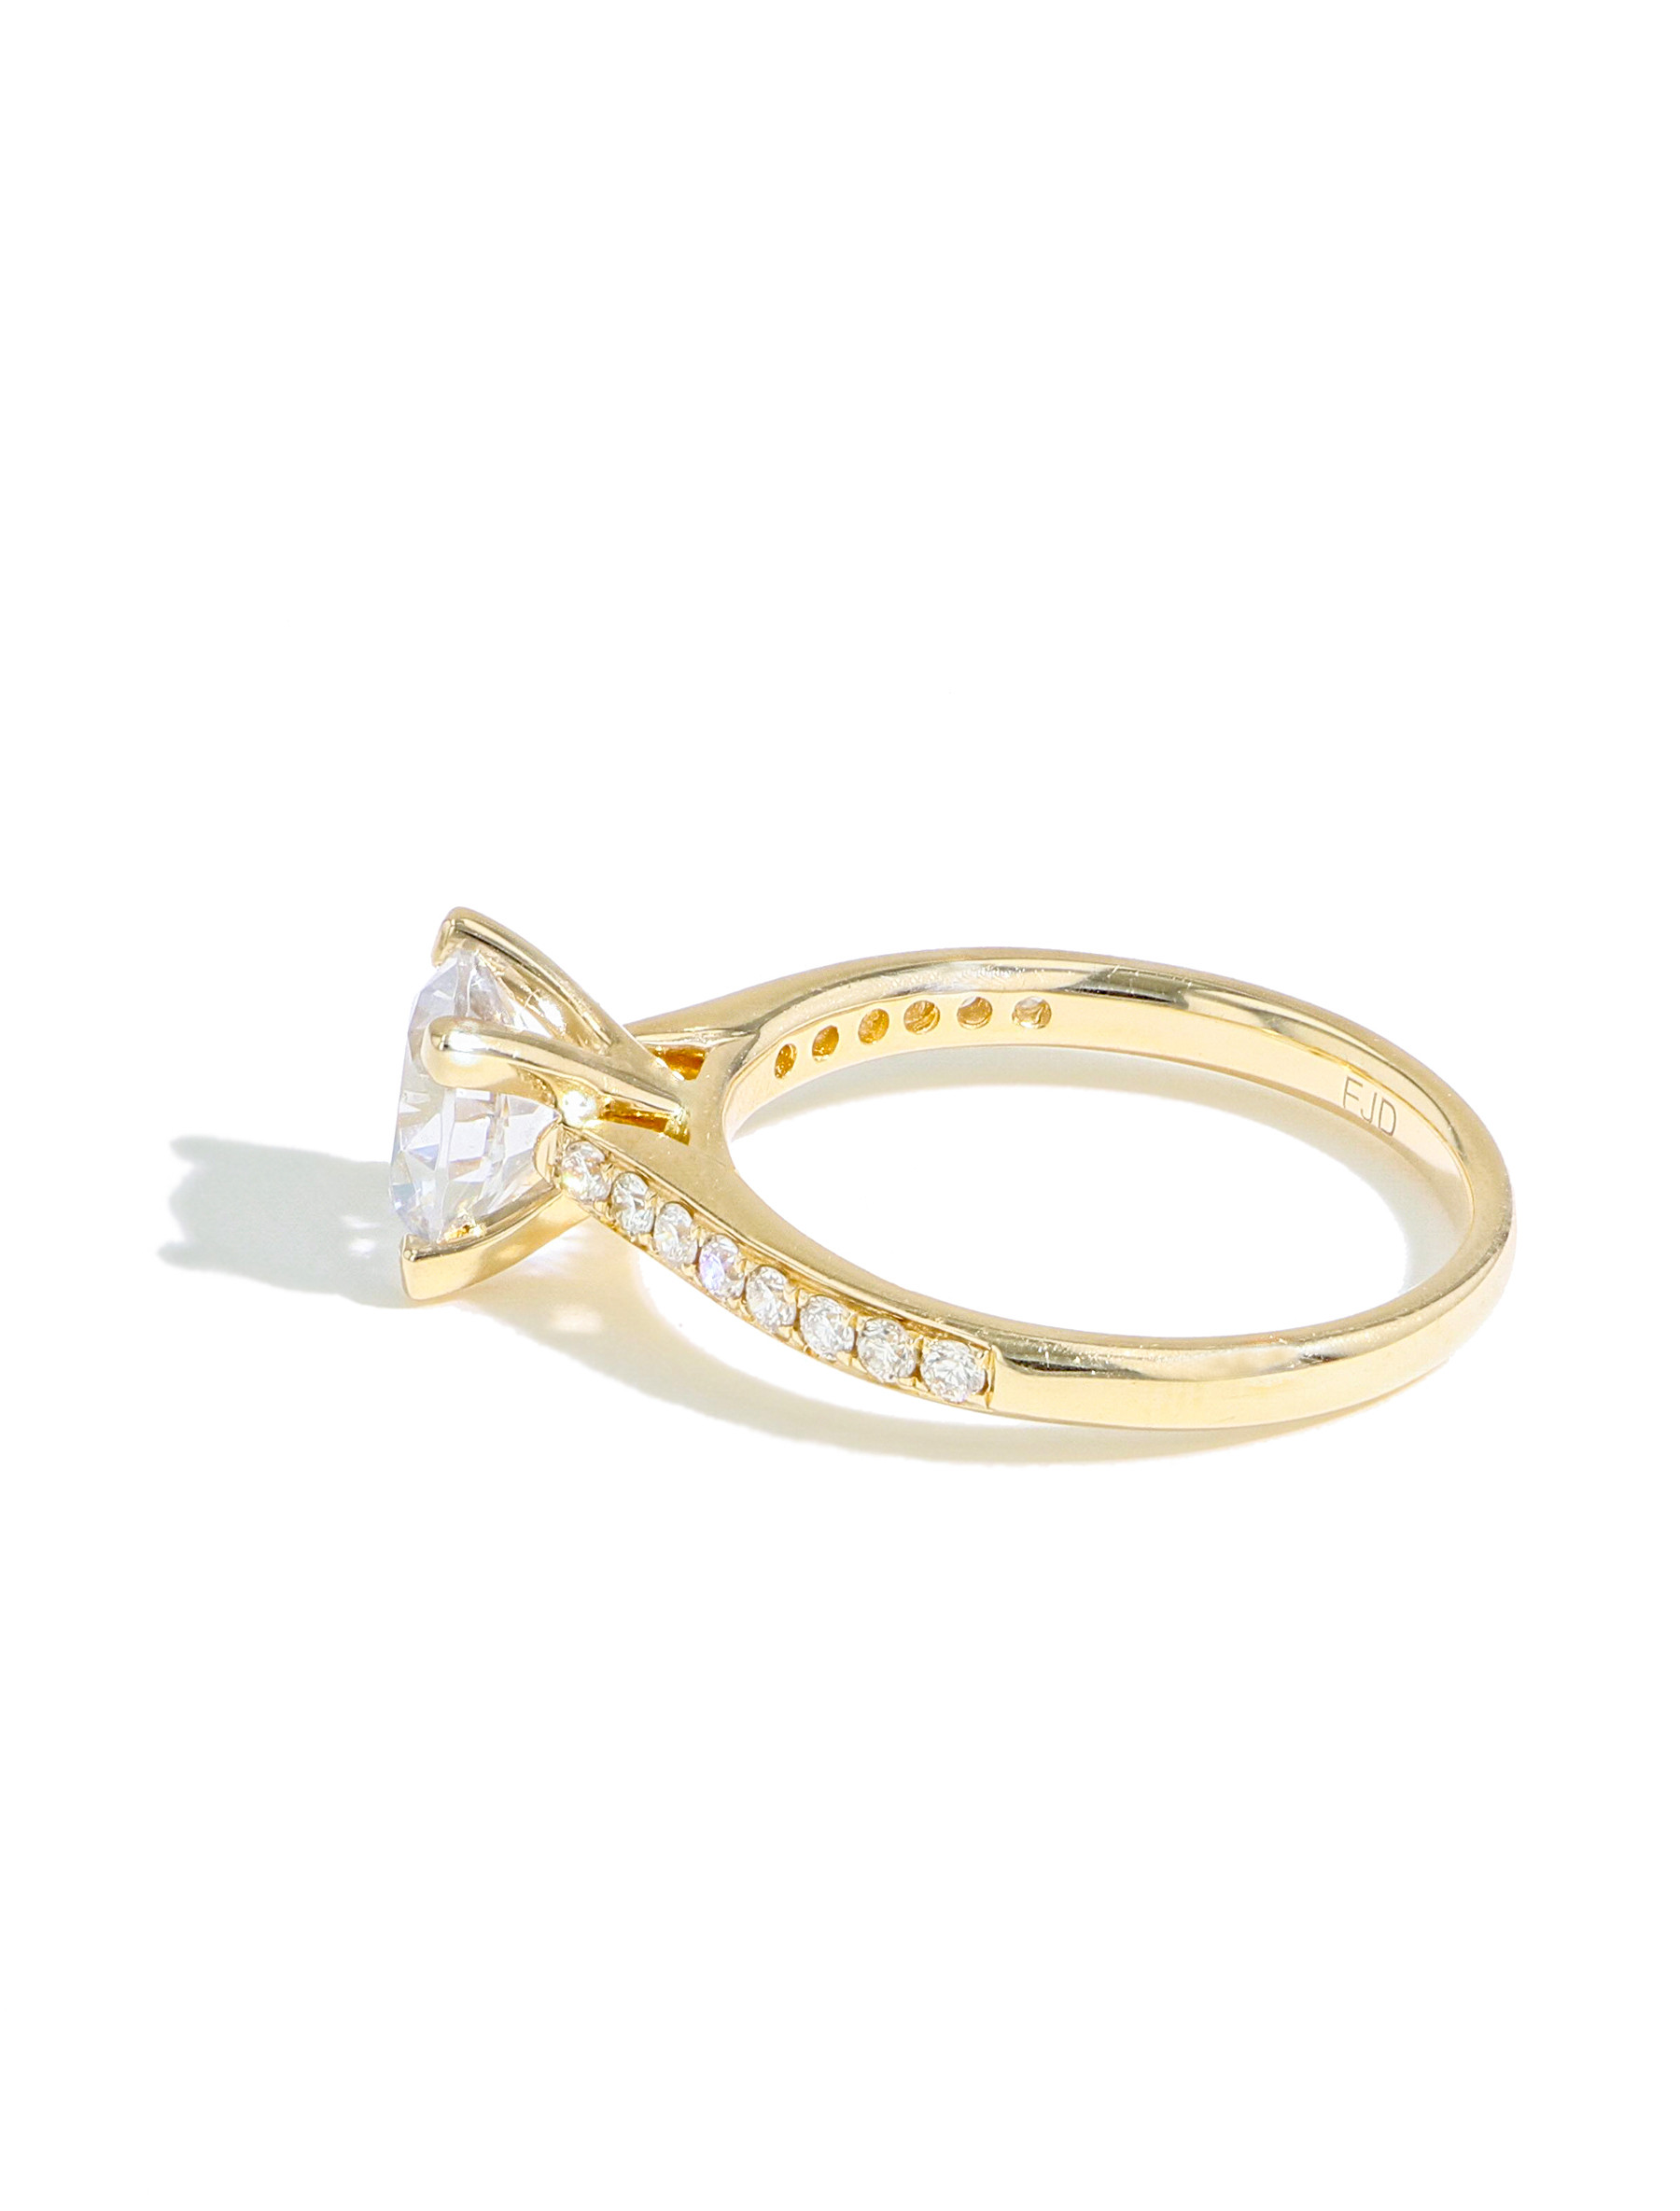 The Round Solitaire Pave Engagement Ring Setting in Yellow Gold side view